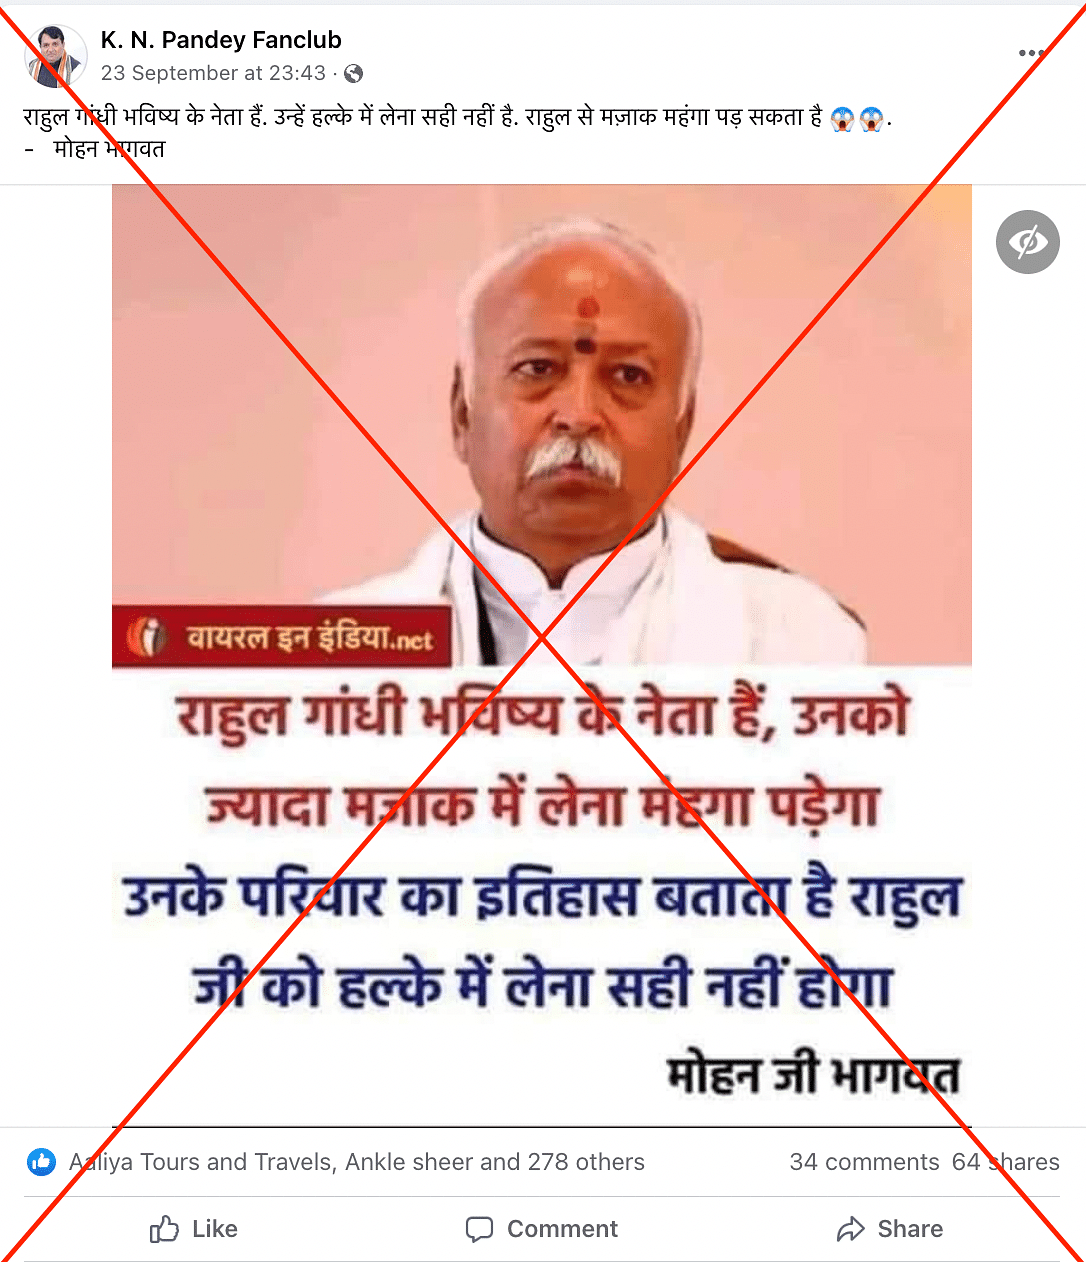 We found no evidence to back the claim that Mohan Bhagwat called Rahul Gandhi a "future leader". 